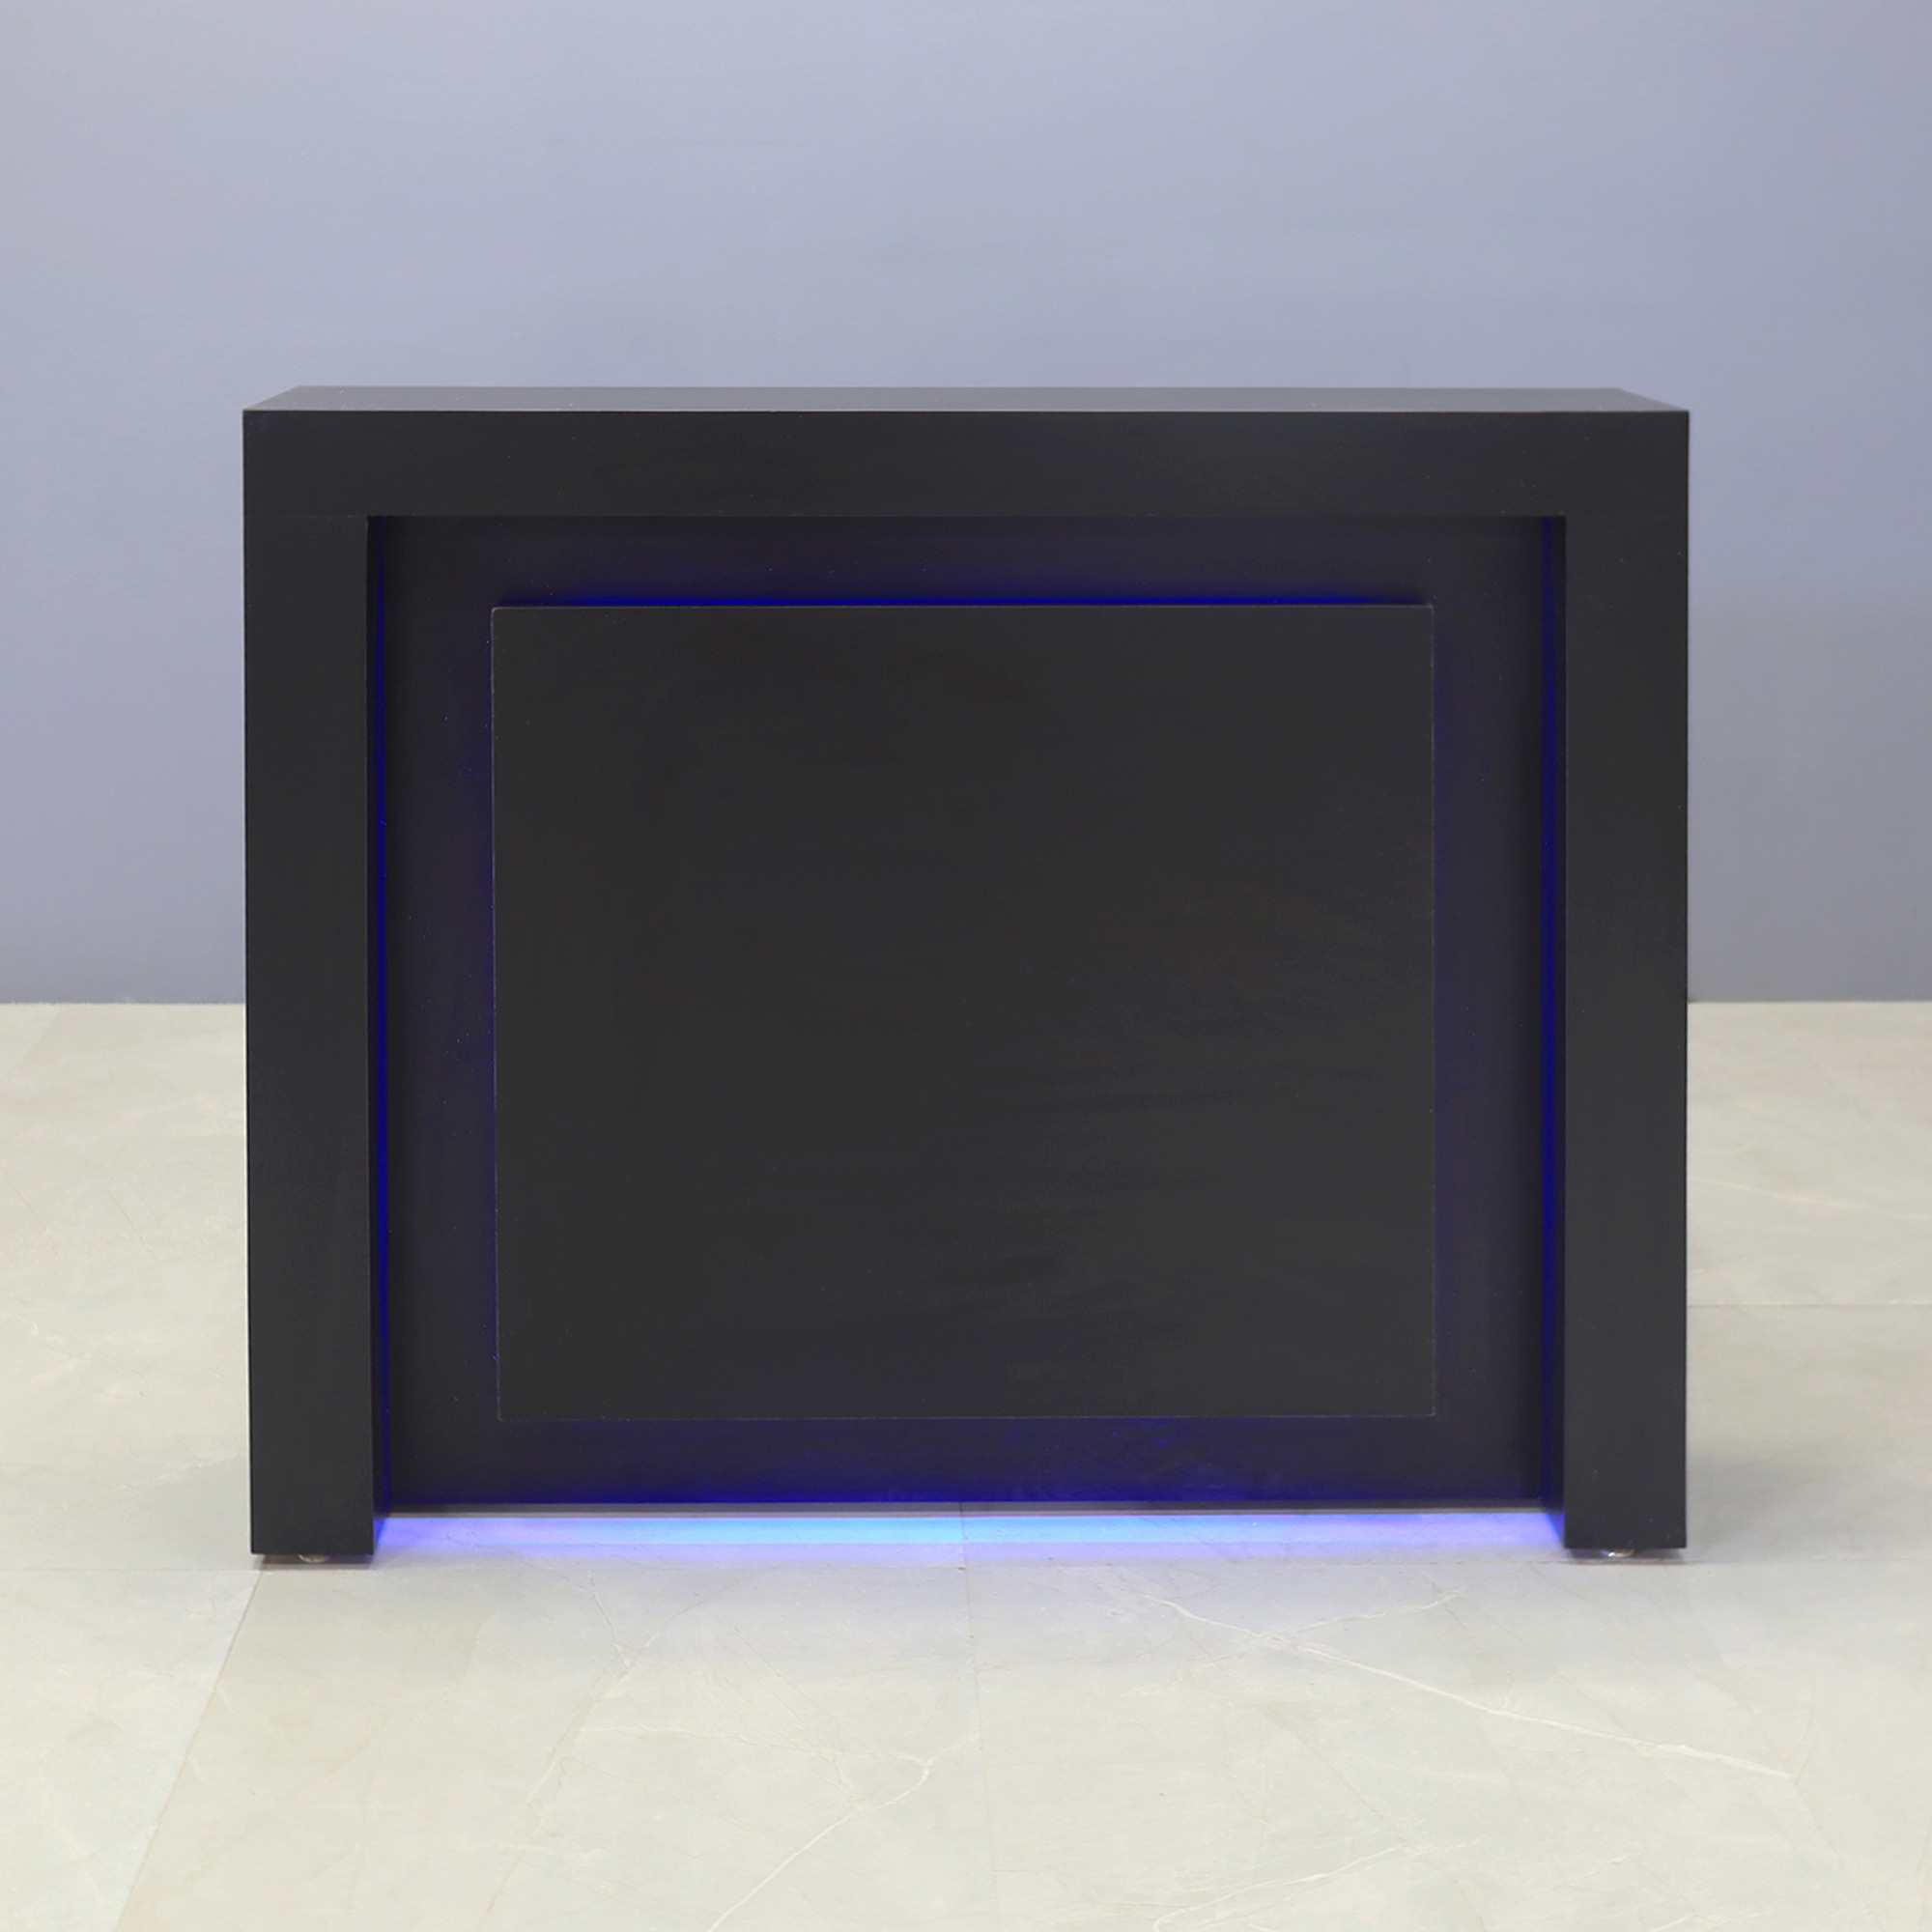 60-inch New York Straight Reception Desk in black matte laminate main desk and accent recess front panel, with colored LED, shown here.